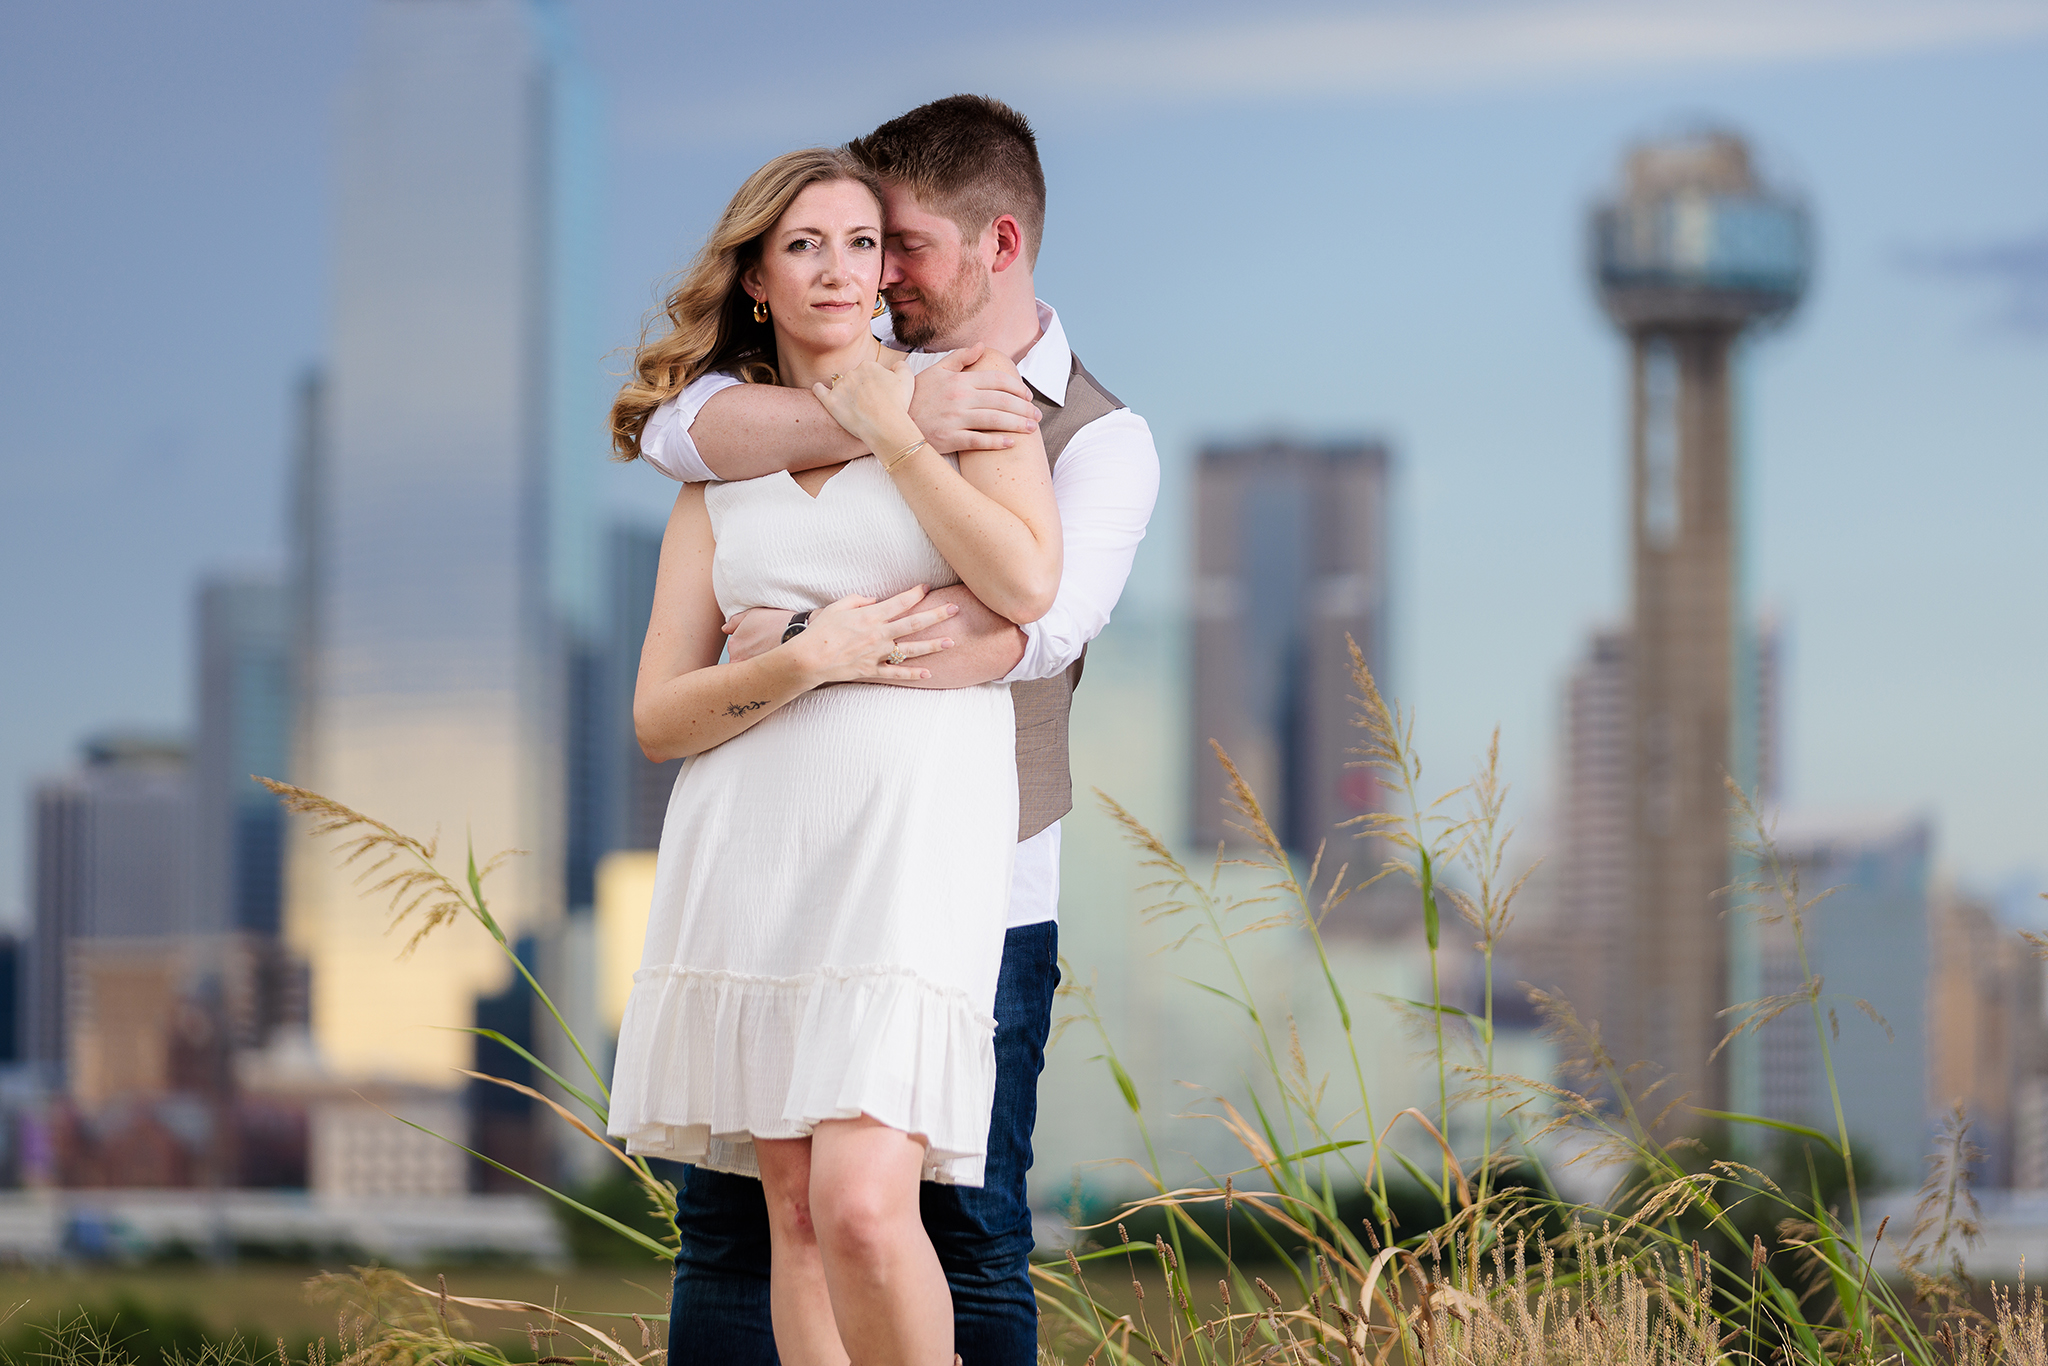 Dallas wedding photographers captures man nuzzling into his fiancee's neck during outdoor engagement session wearing white dress